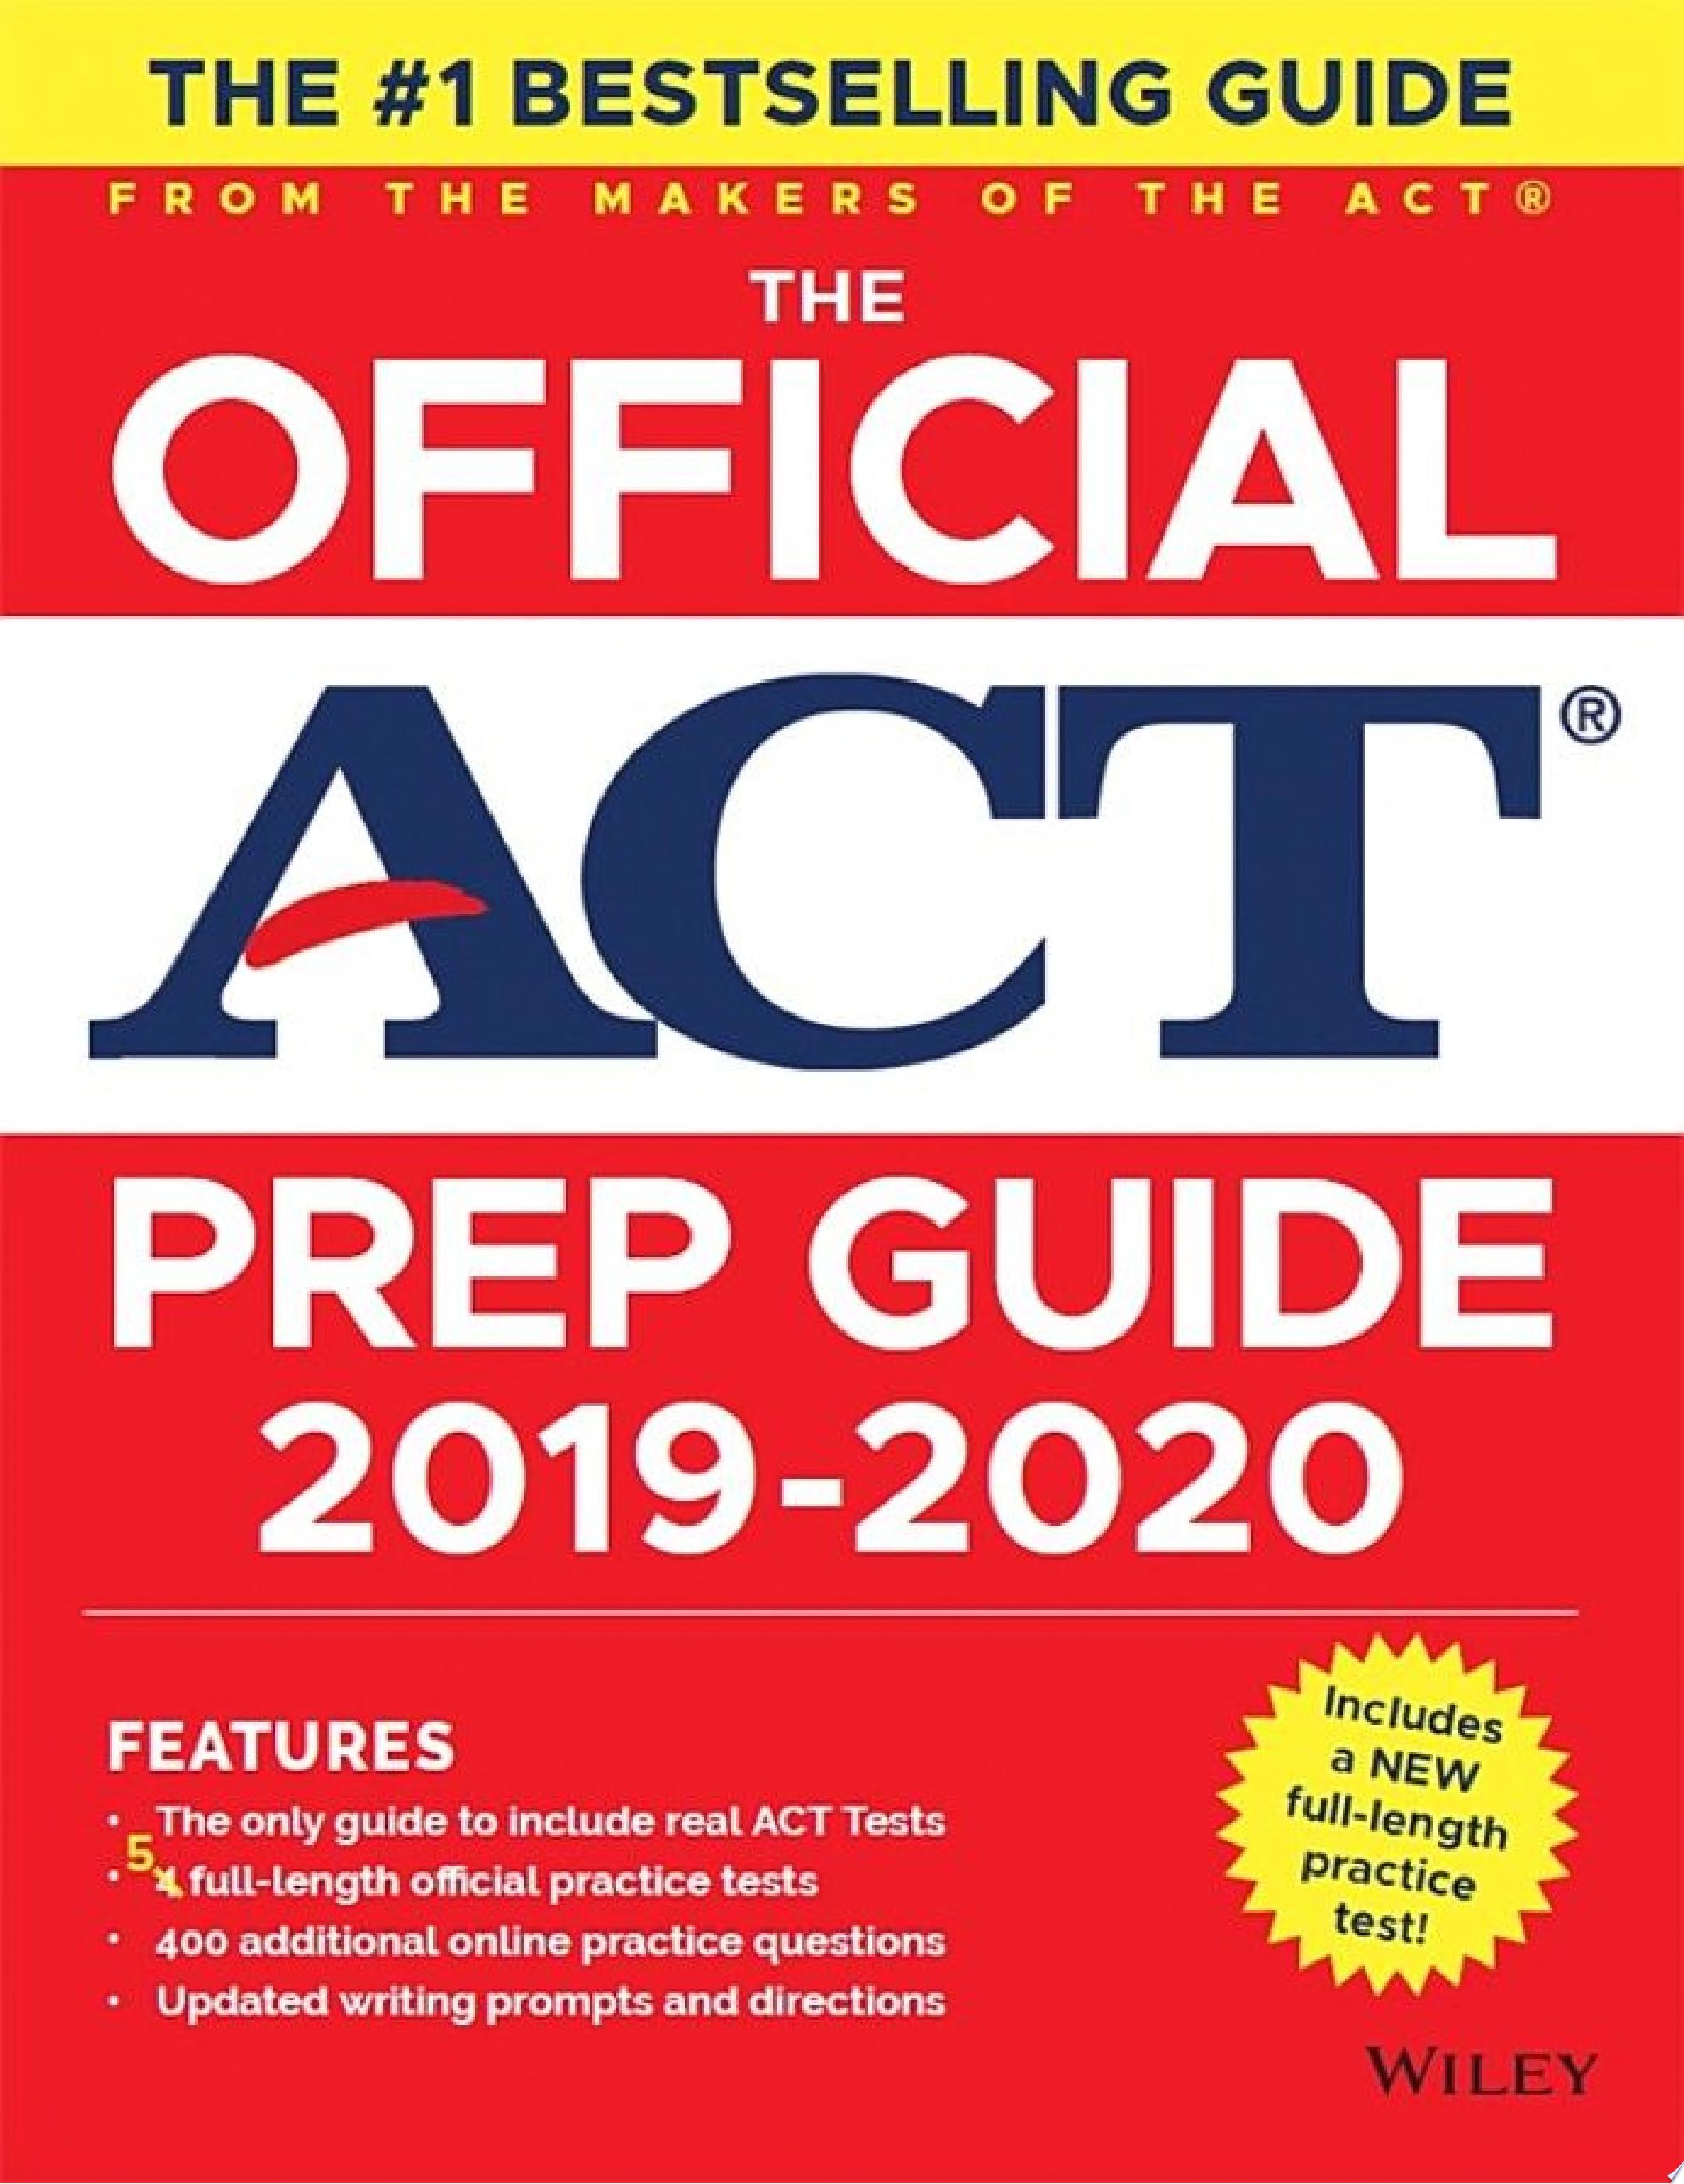 Image for "The Official ACT Prep Guide 2019-2020, (Book + 5 Practice Tests + Bonus Online Content)"